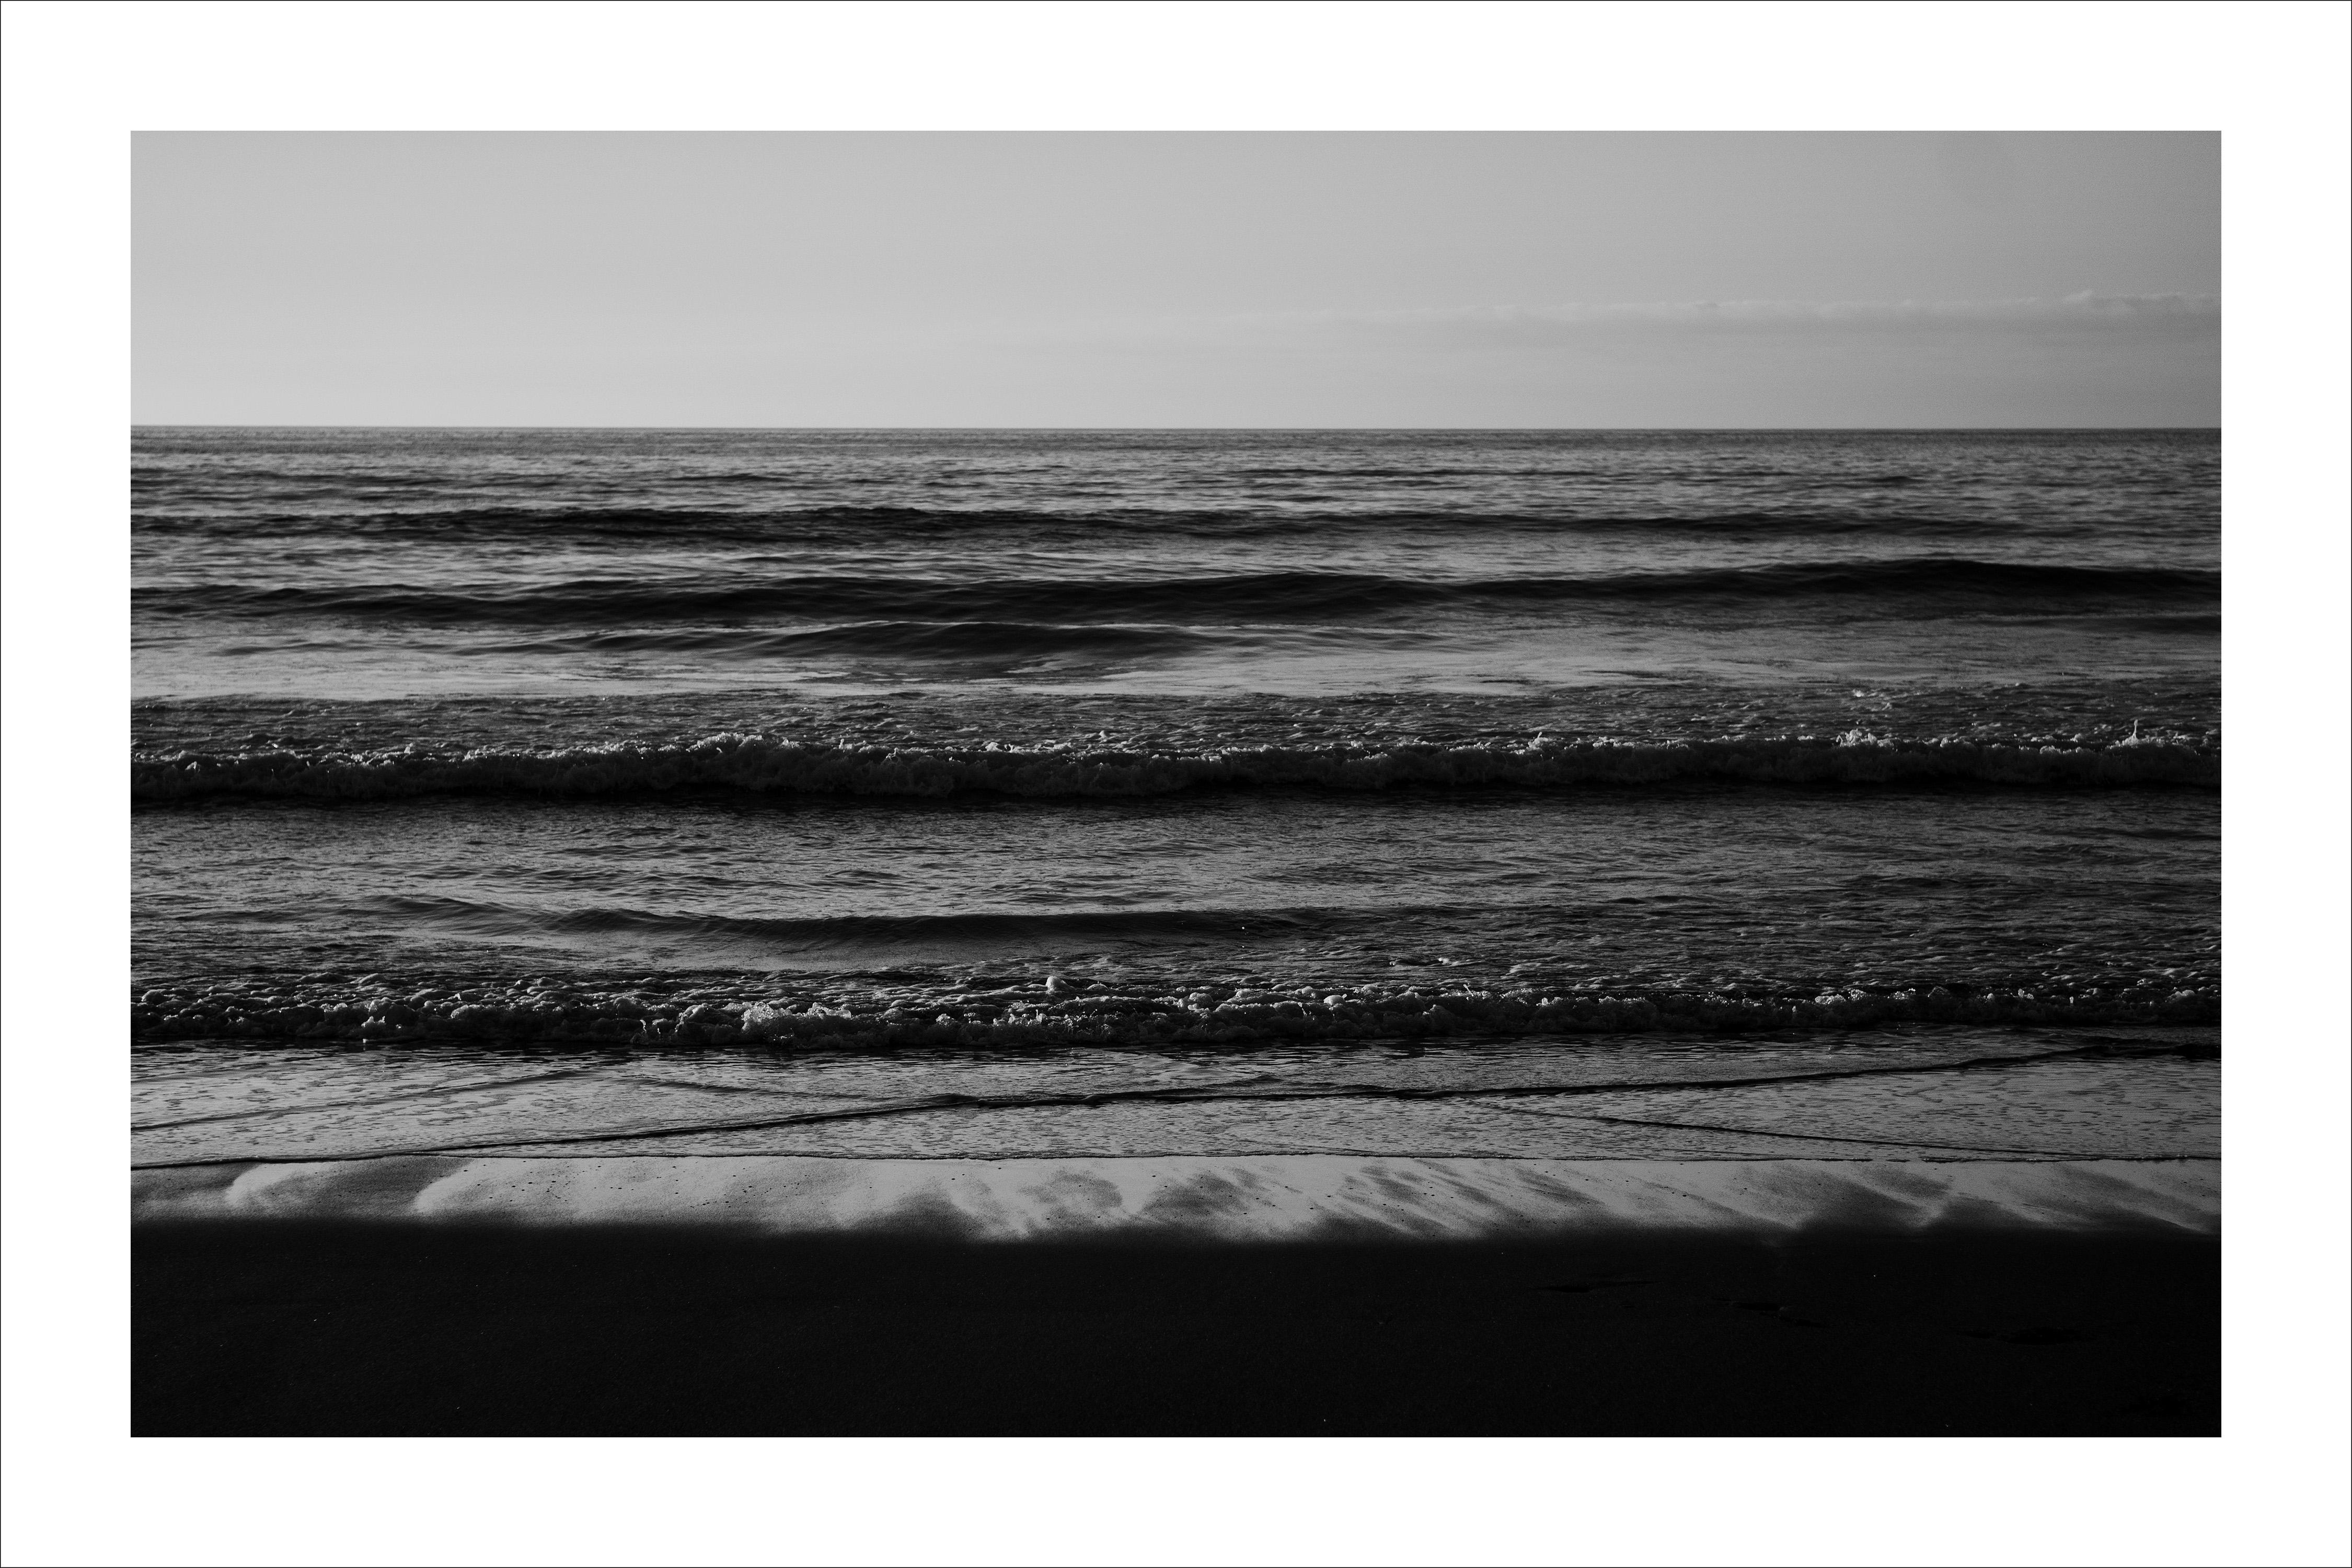 Kind of Cyan Landscape Photograph - Pacific Beach Horizon, Colossal Seascape in Black and White, Navy Sunset, Classy